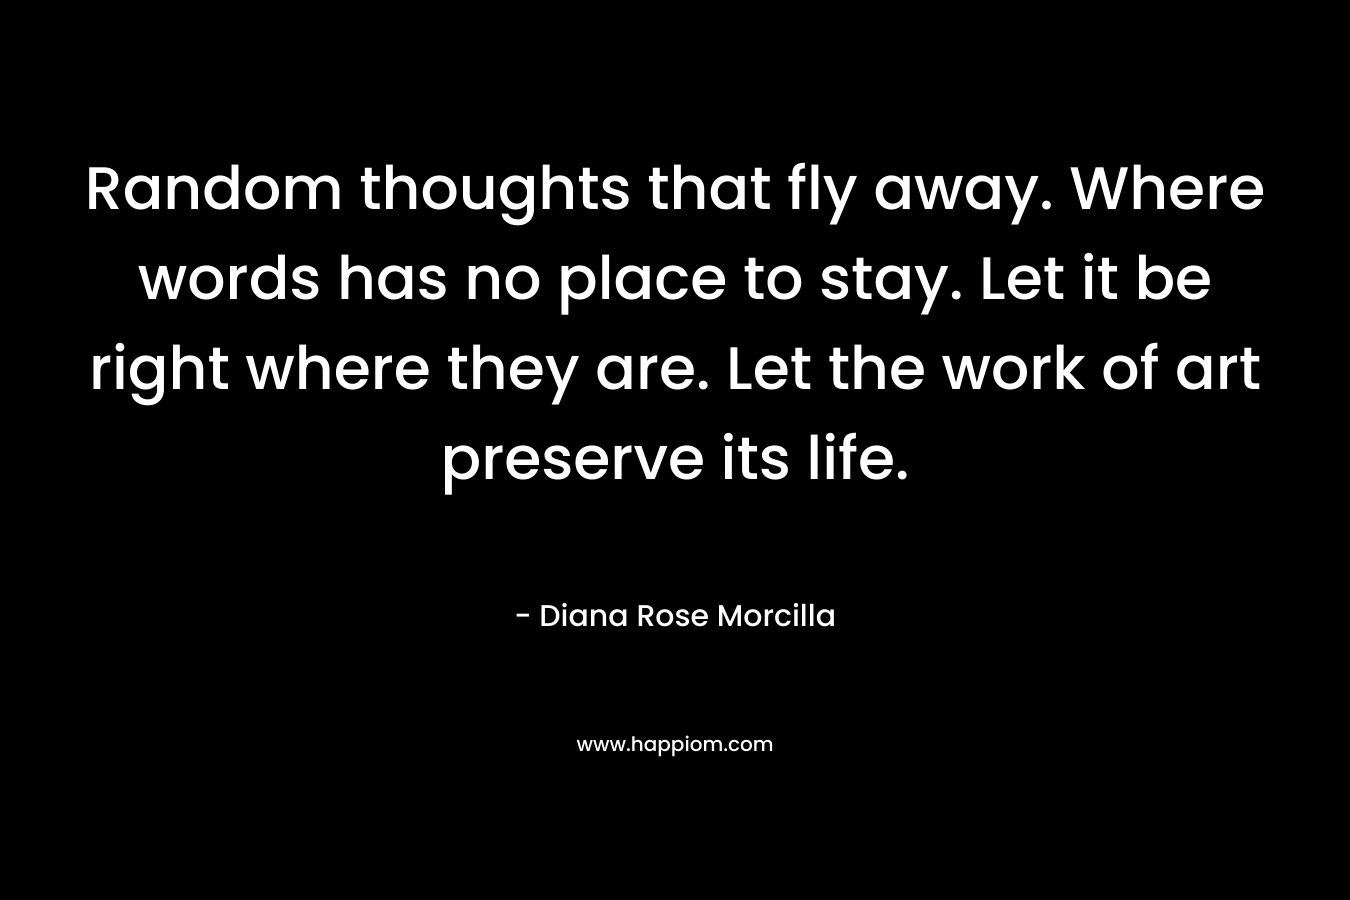 Random thoughts that fly away. Where words has no place to stay. Let it be right where they are. Let the work of art preserve its life. – Diana Rose Morcilla